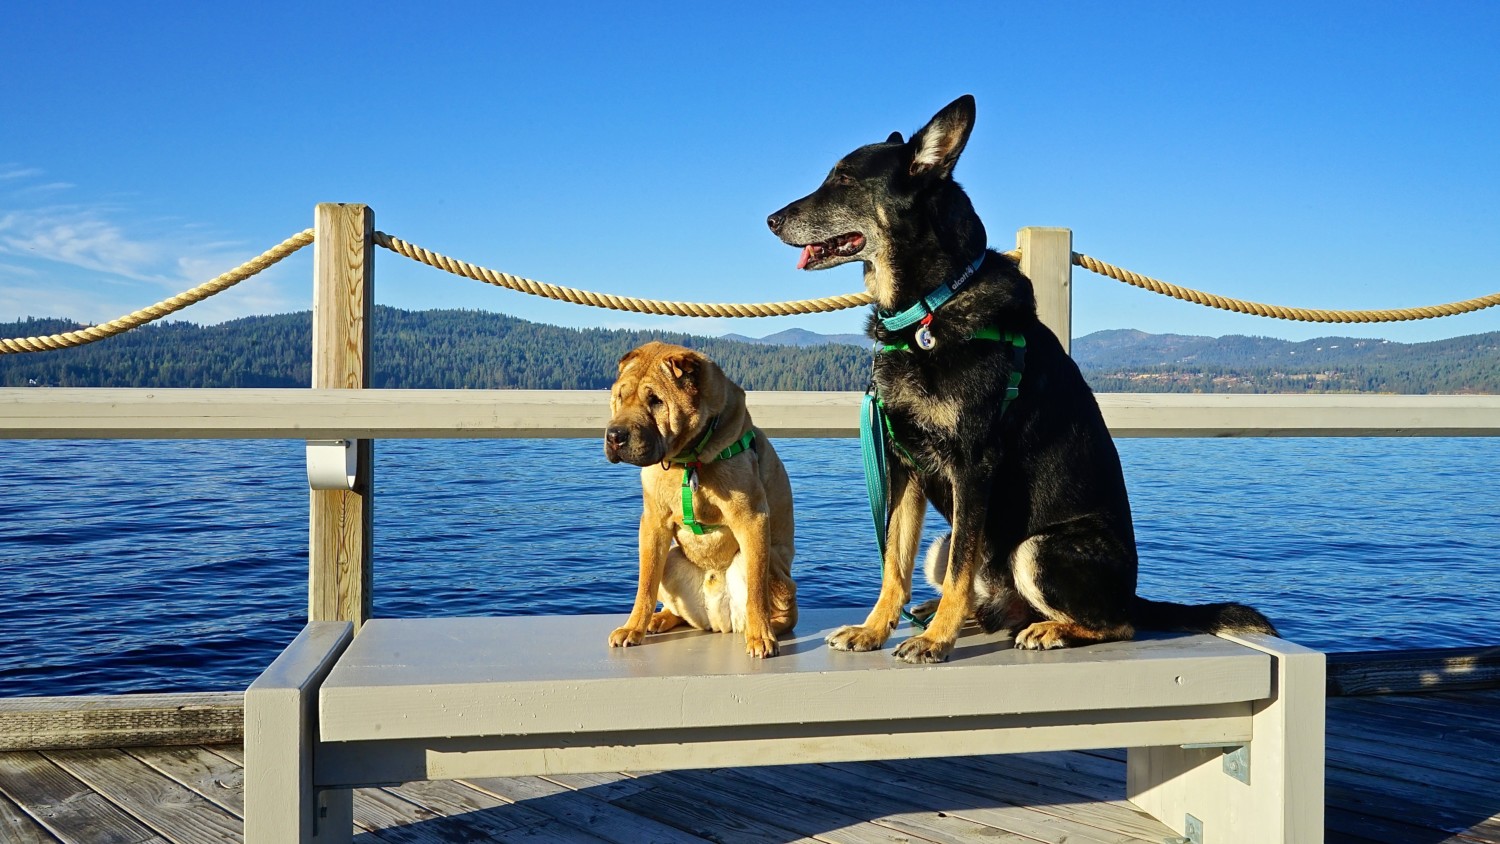 Pet Friendly Things To Do In Coeur d'Alene, Idaho